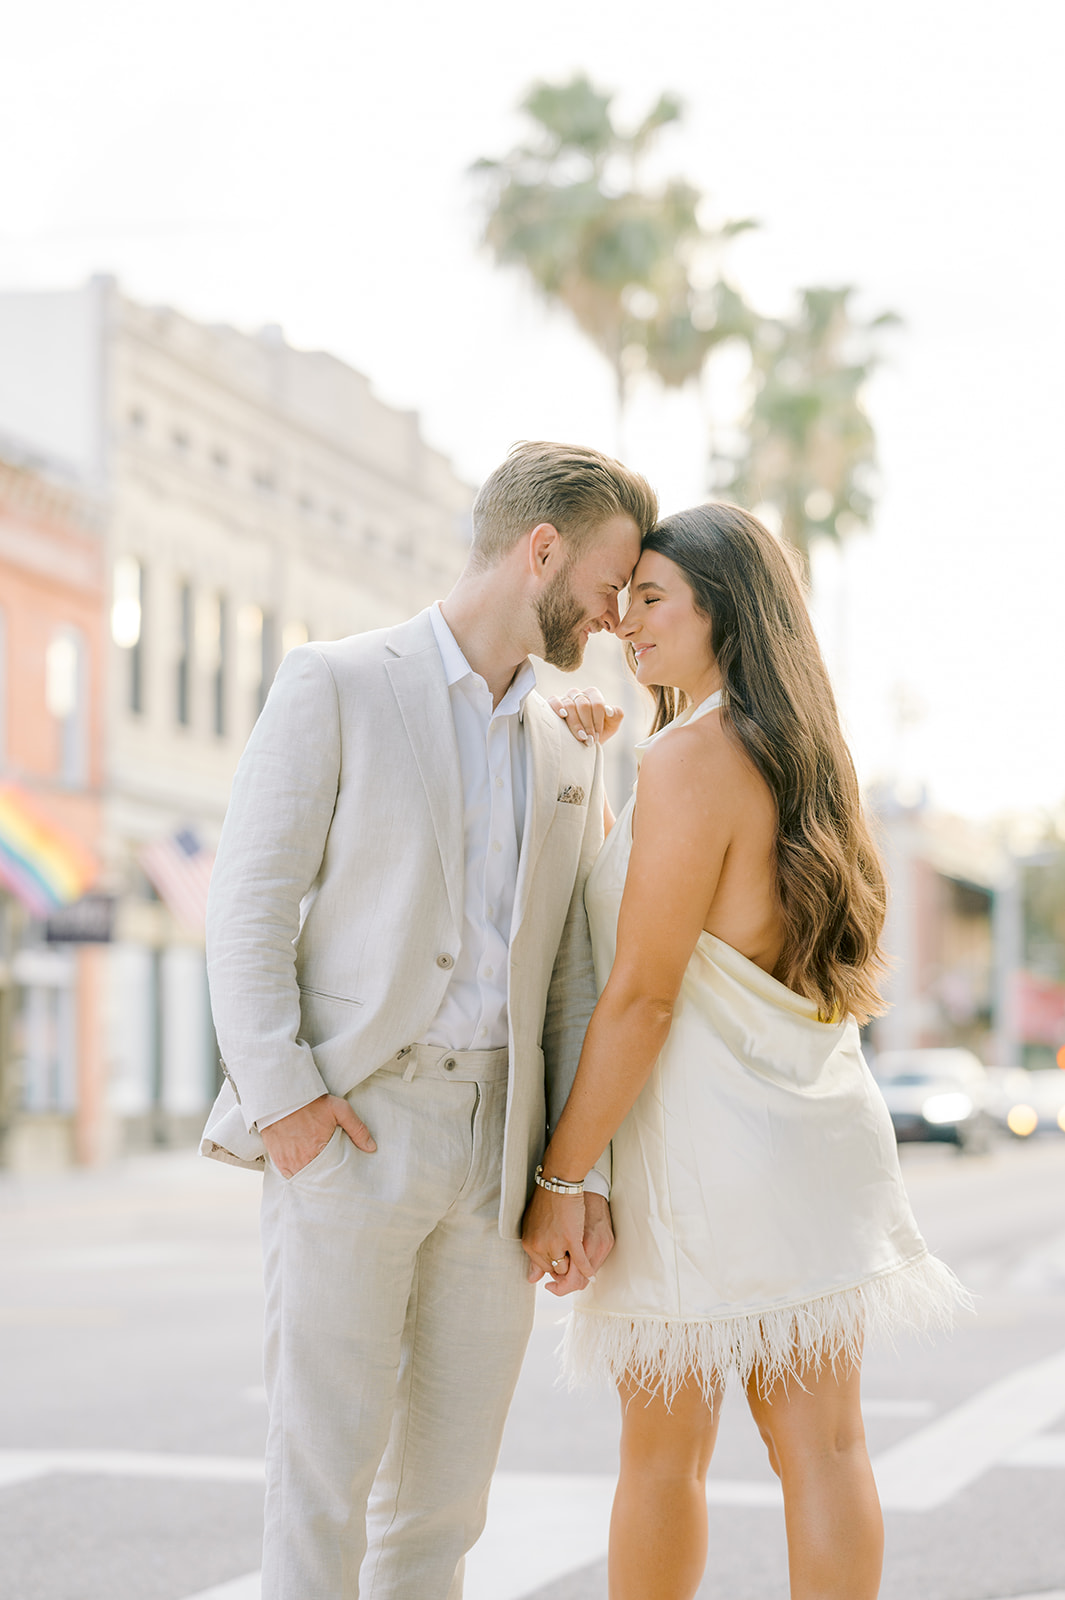 "Classic architecture of Ybor City enhancing the couple's love story"
